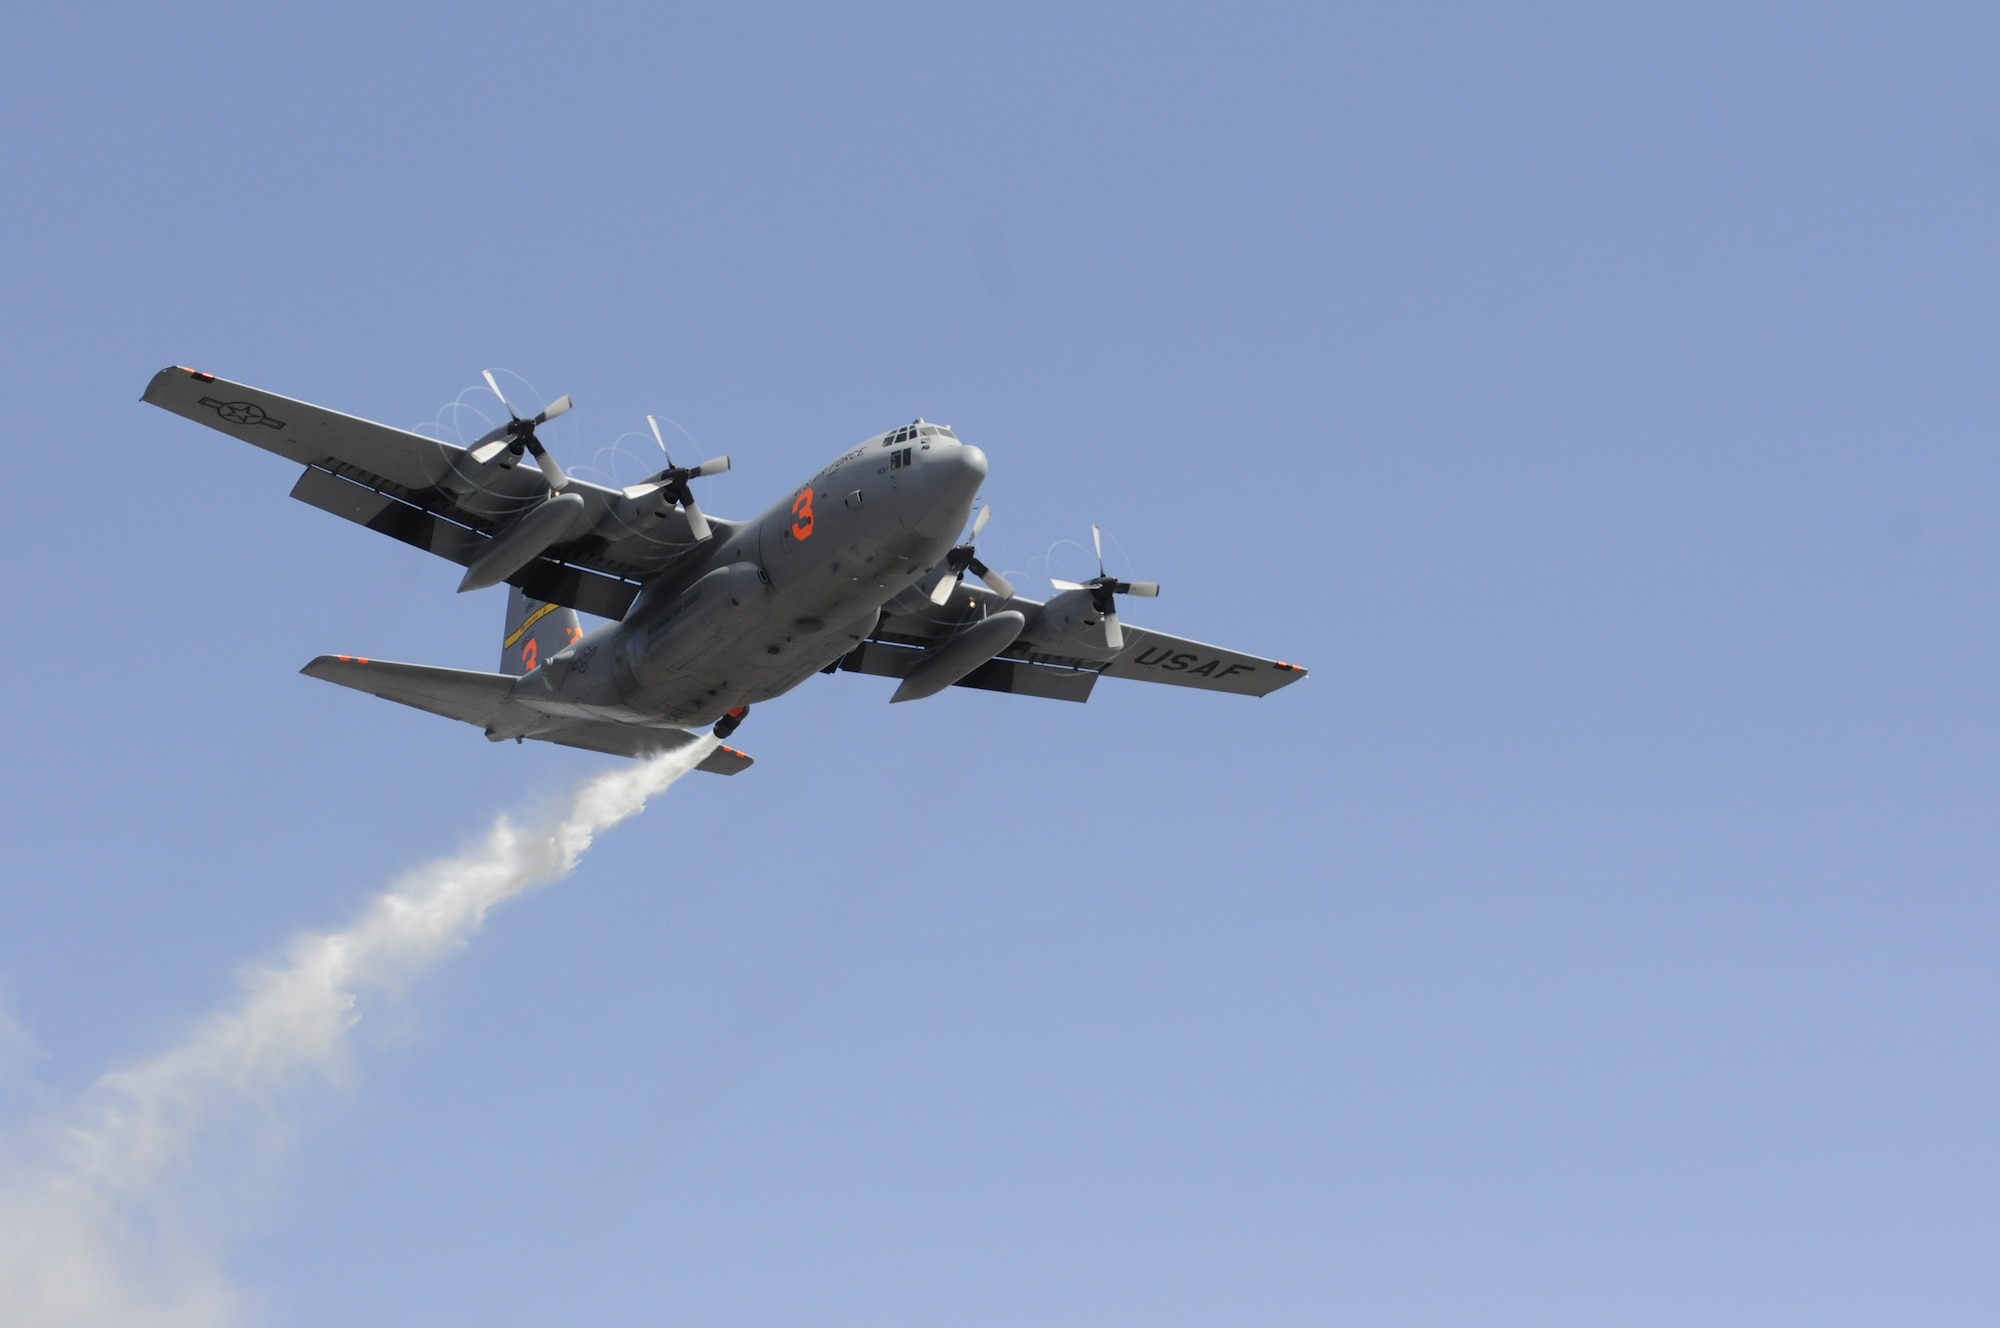 A Modular Airborne Fire Fighting System-equipped C-130 from the 153rd Airlift Wing, after following a U.S. Forest Service lead plane, performs a training mission which includes water drops near the Medicine Bow National Forest, May 10, 2013. The Wyoming Air National Guard's 153rd AW held its annual MAFFS certification and re-certification training. When it is determined MAFFS is needed, the National Interagency Fire Center through U.S. Northern Command requests the Department of Defense's U.S. Air Force resources. (U.S. Air National Guard photo by Capt. Rusty Ridley)